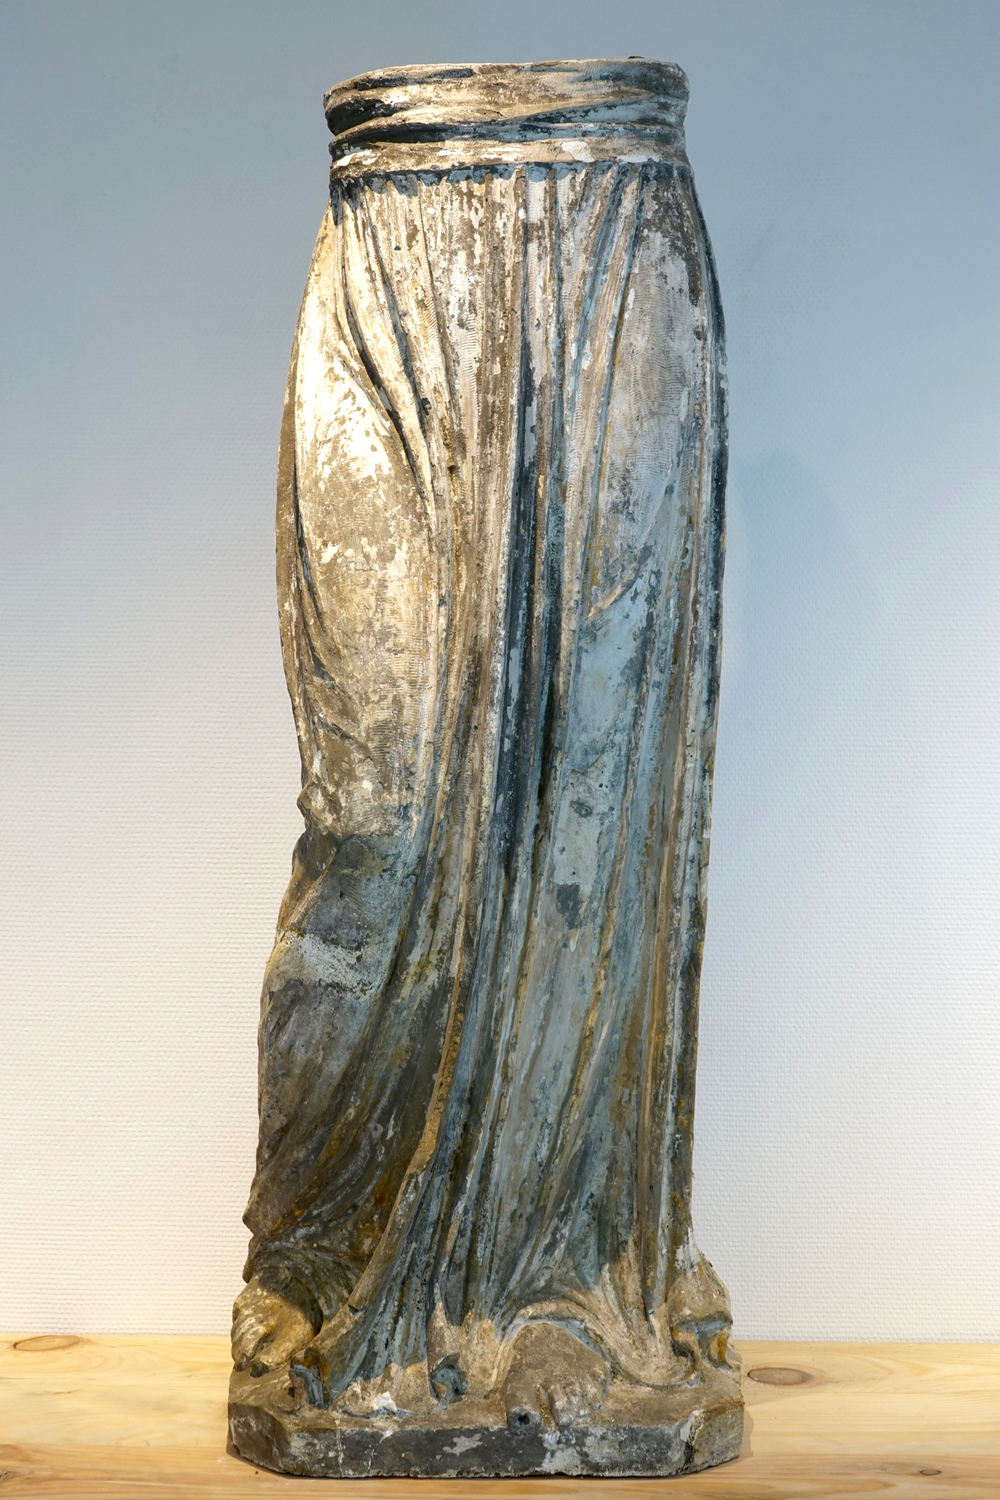 A large plaster cast of legs in a robe, 19/20th C., Bruges